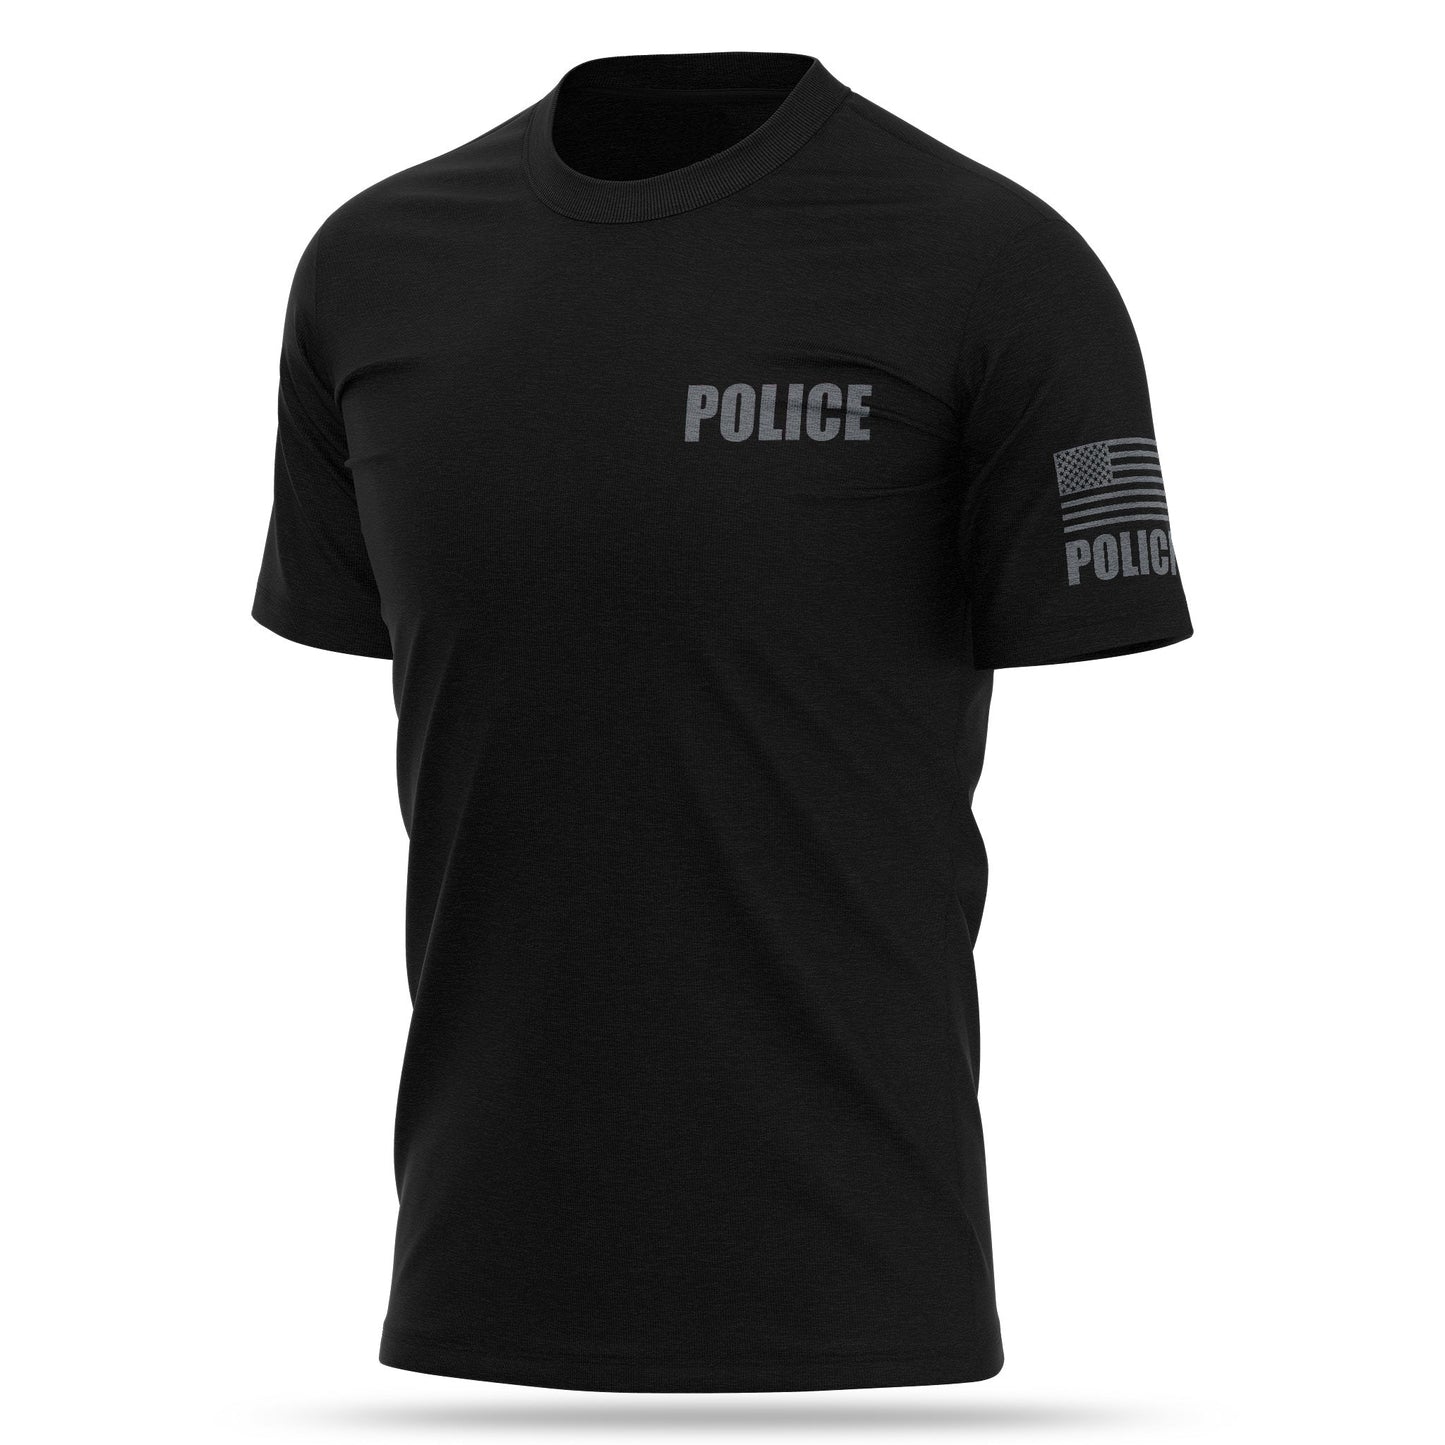 [POLICE] Cotton Blend Shirt [BLK/GRY]-13 Fifty Apparel